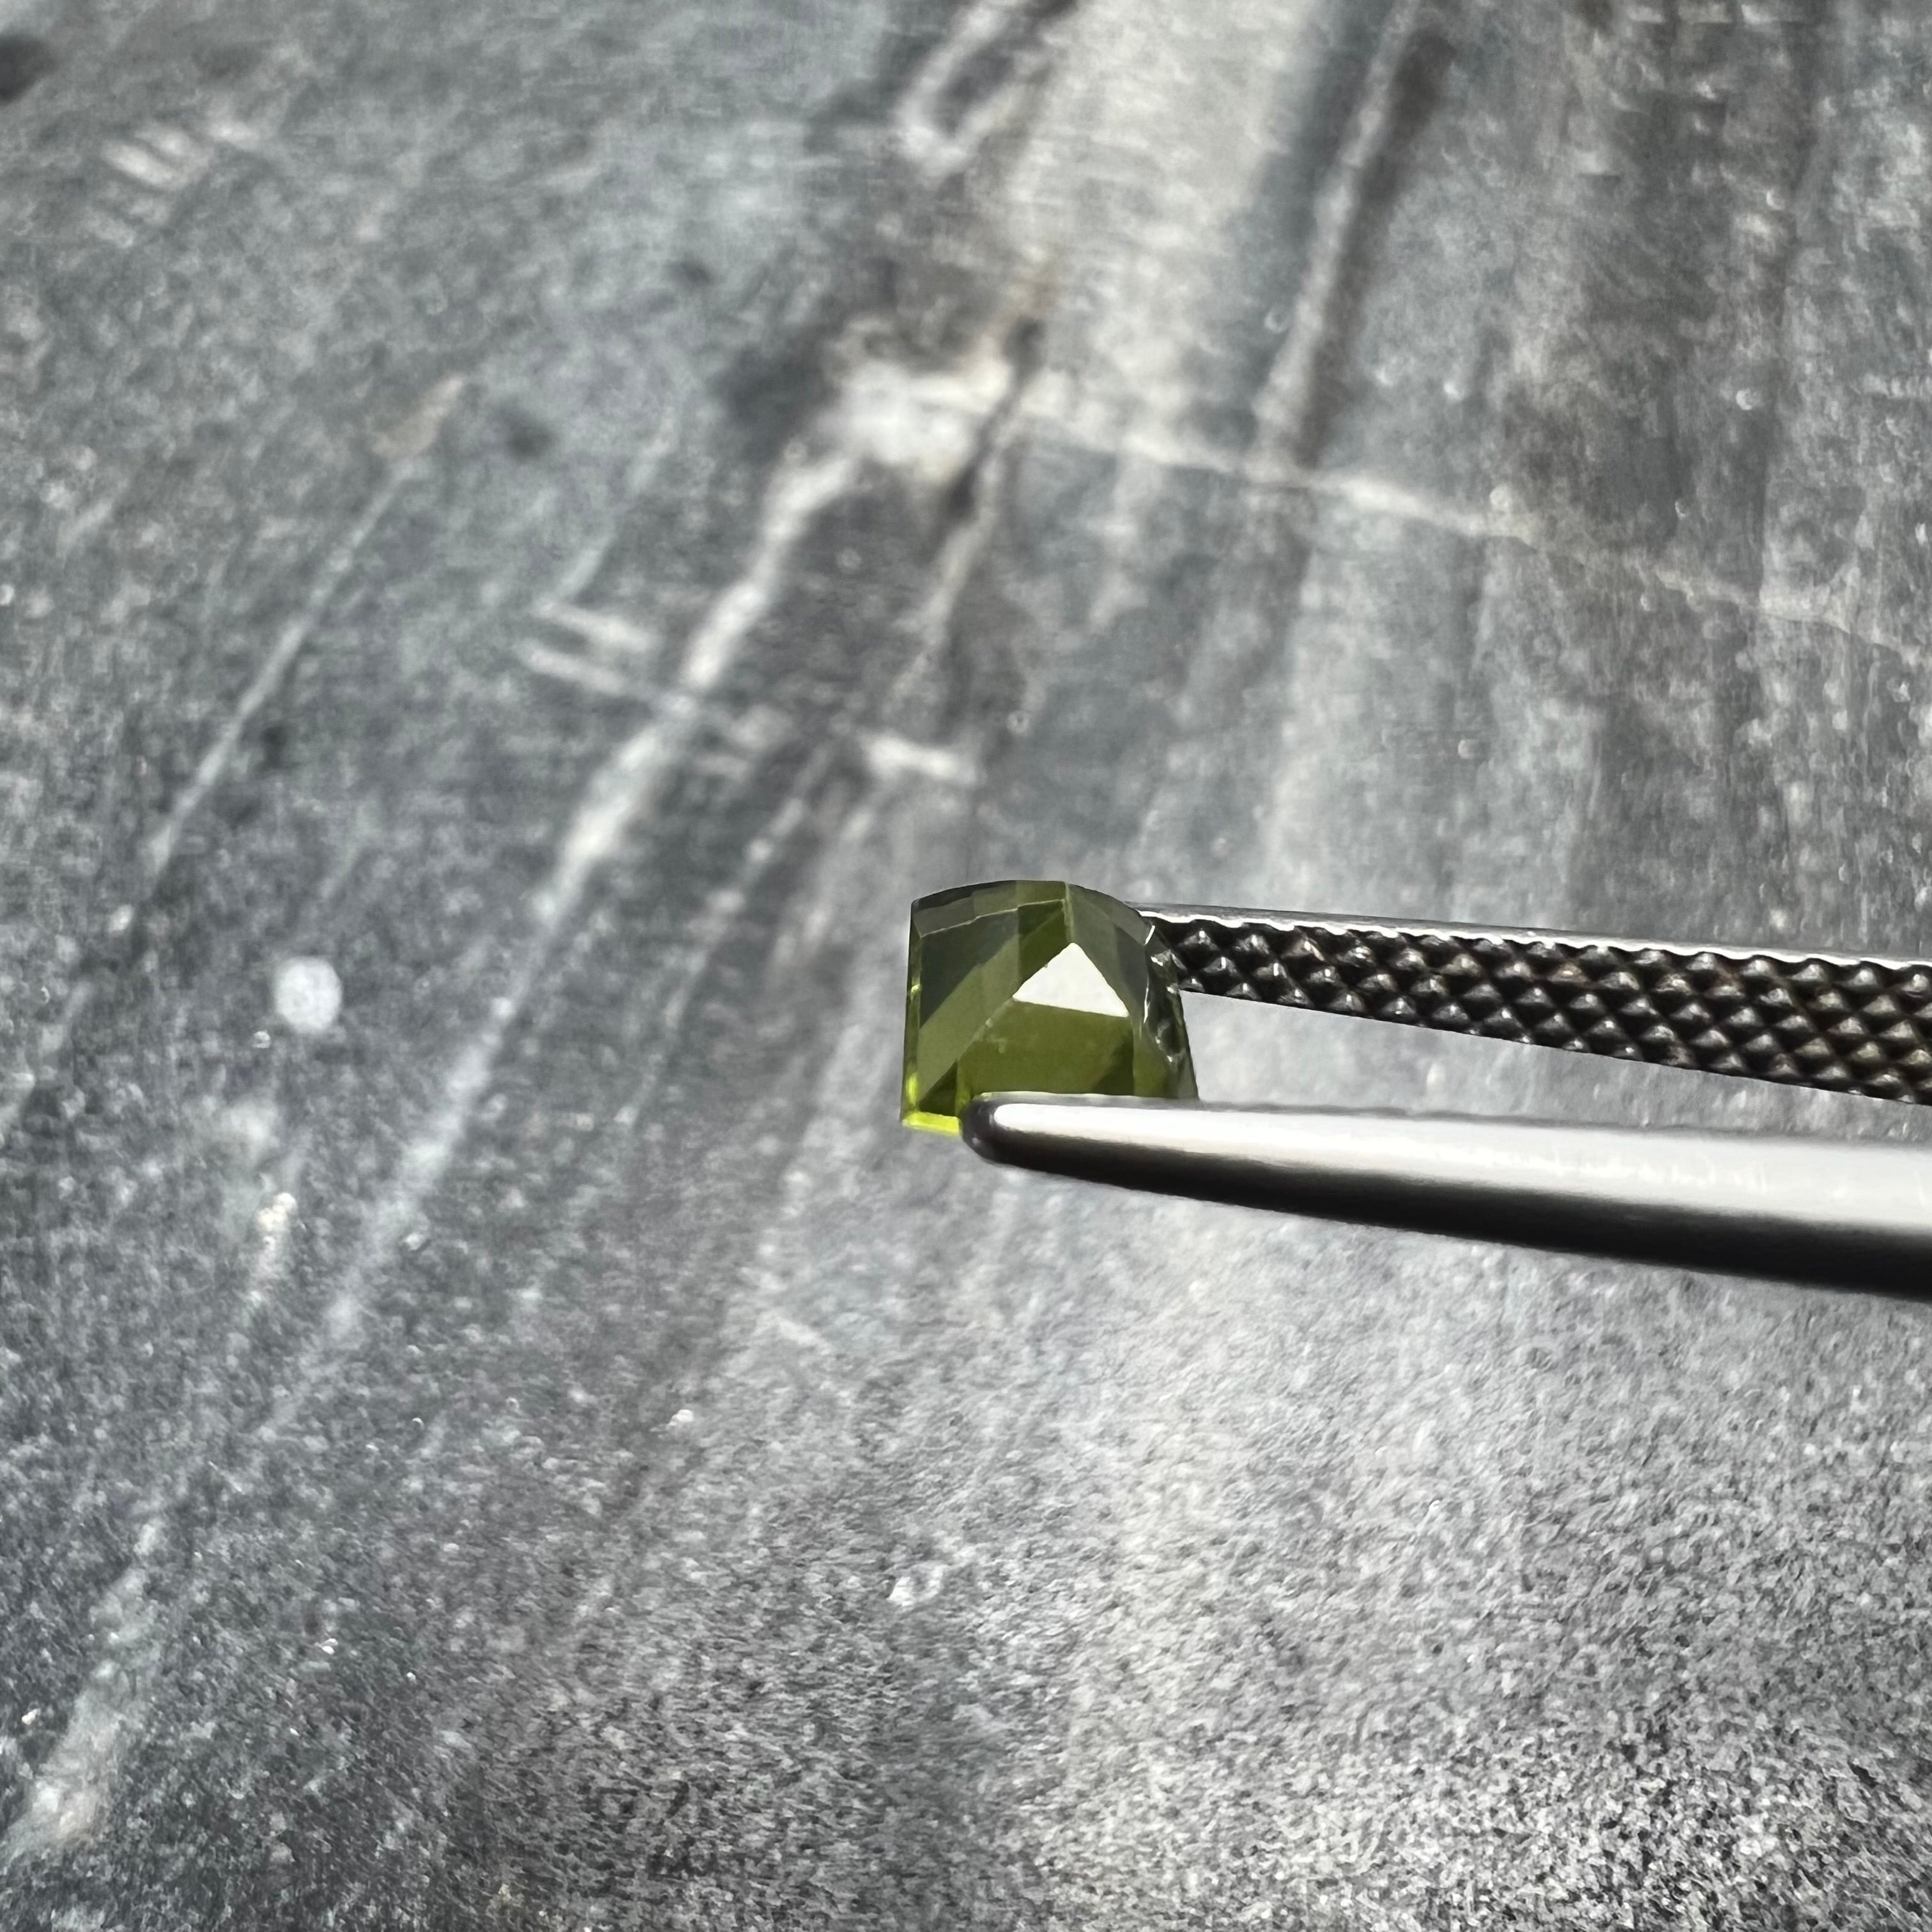 .62CT Loose Natural  Peridot Baguette 6.09x4.18x2.62mm Earth mined Gemstone